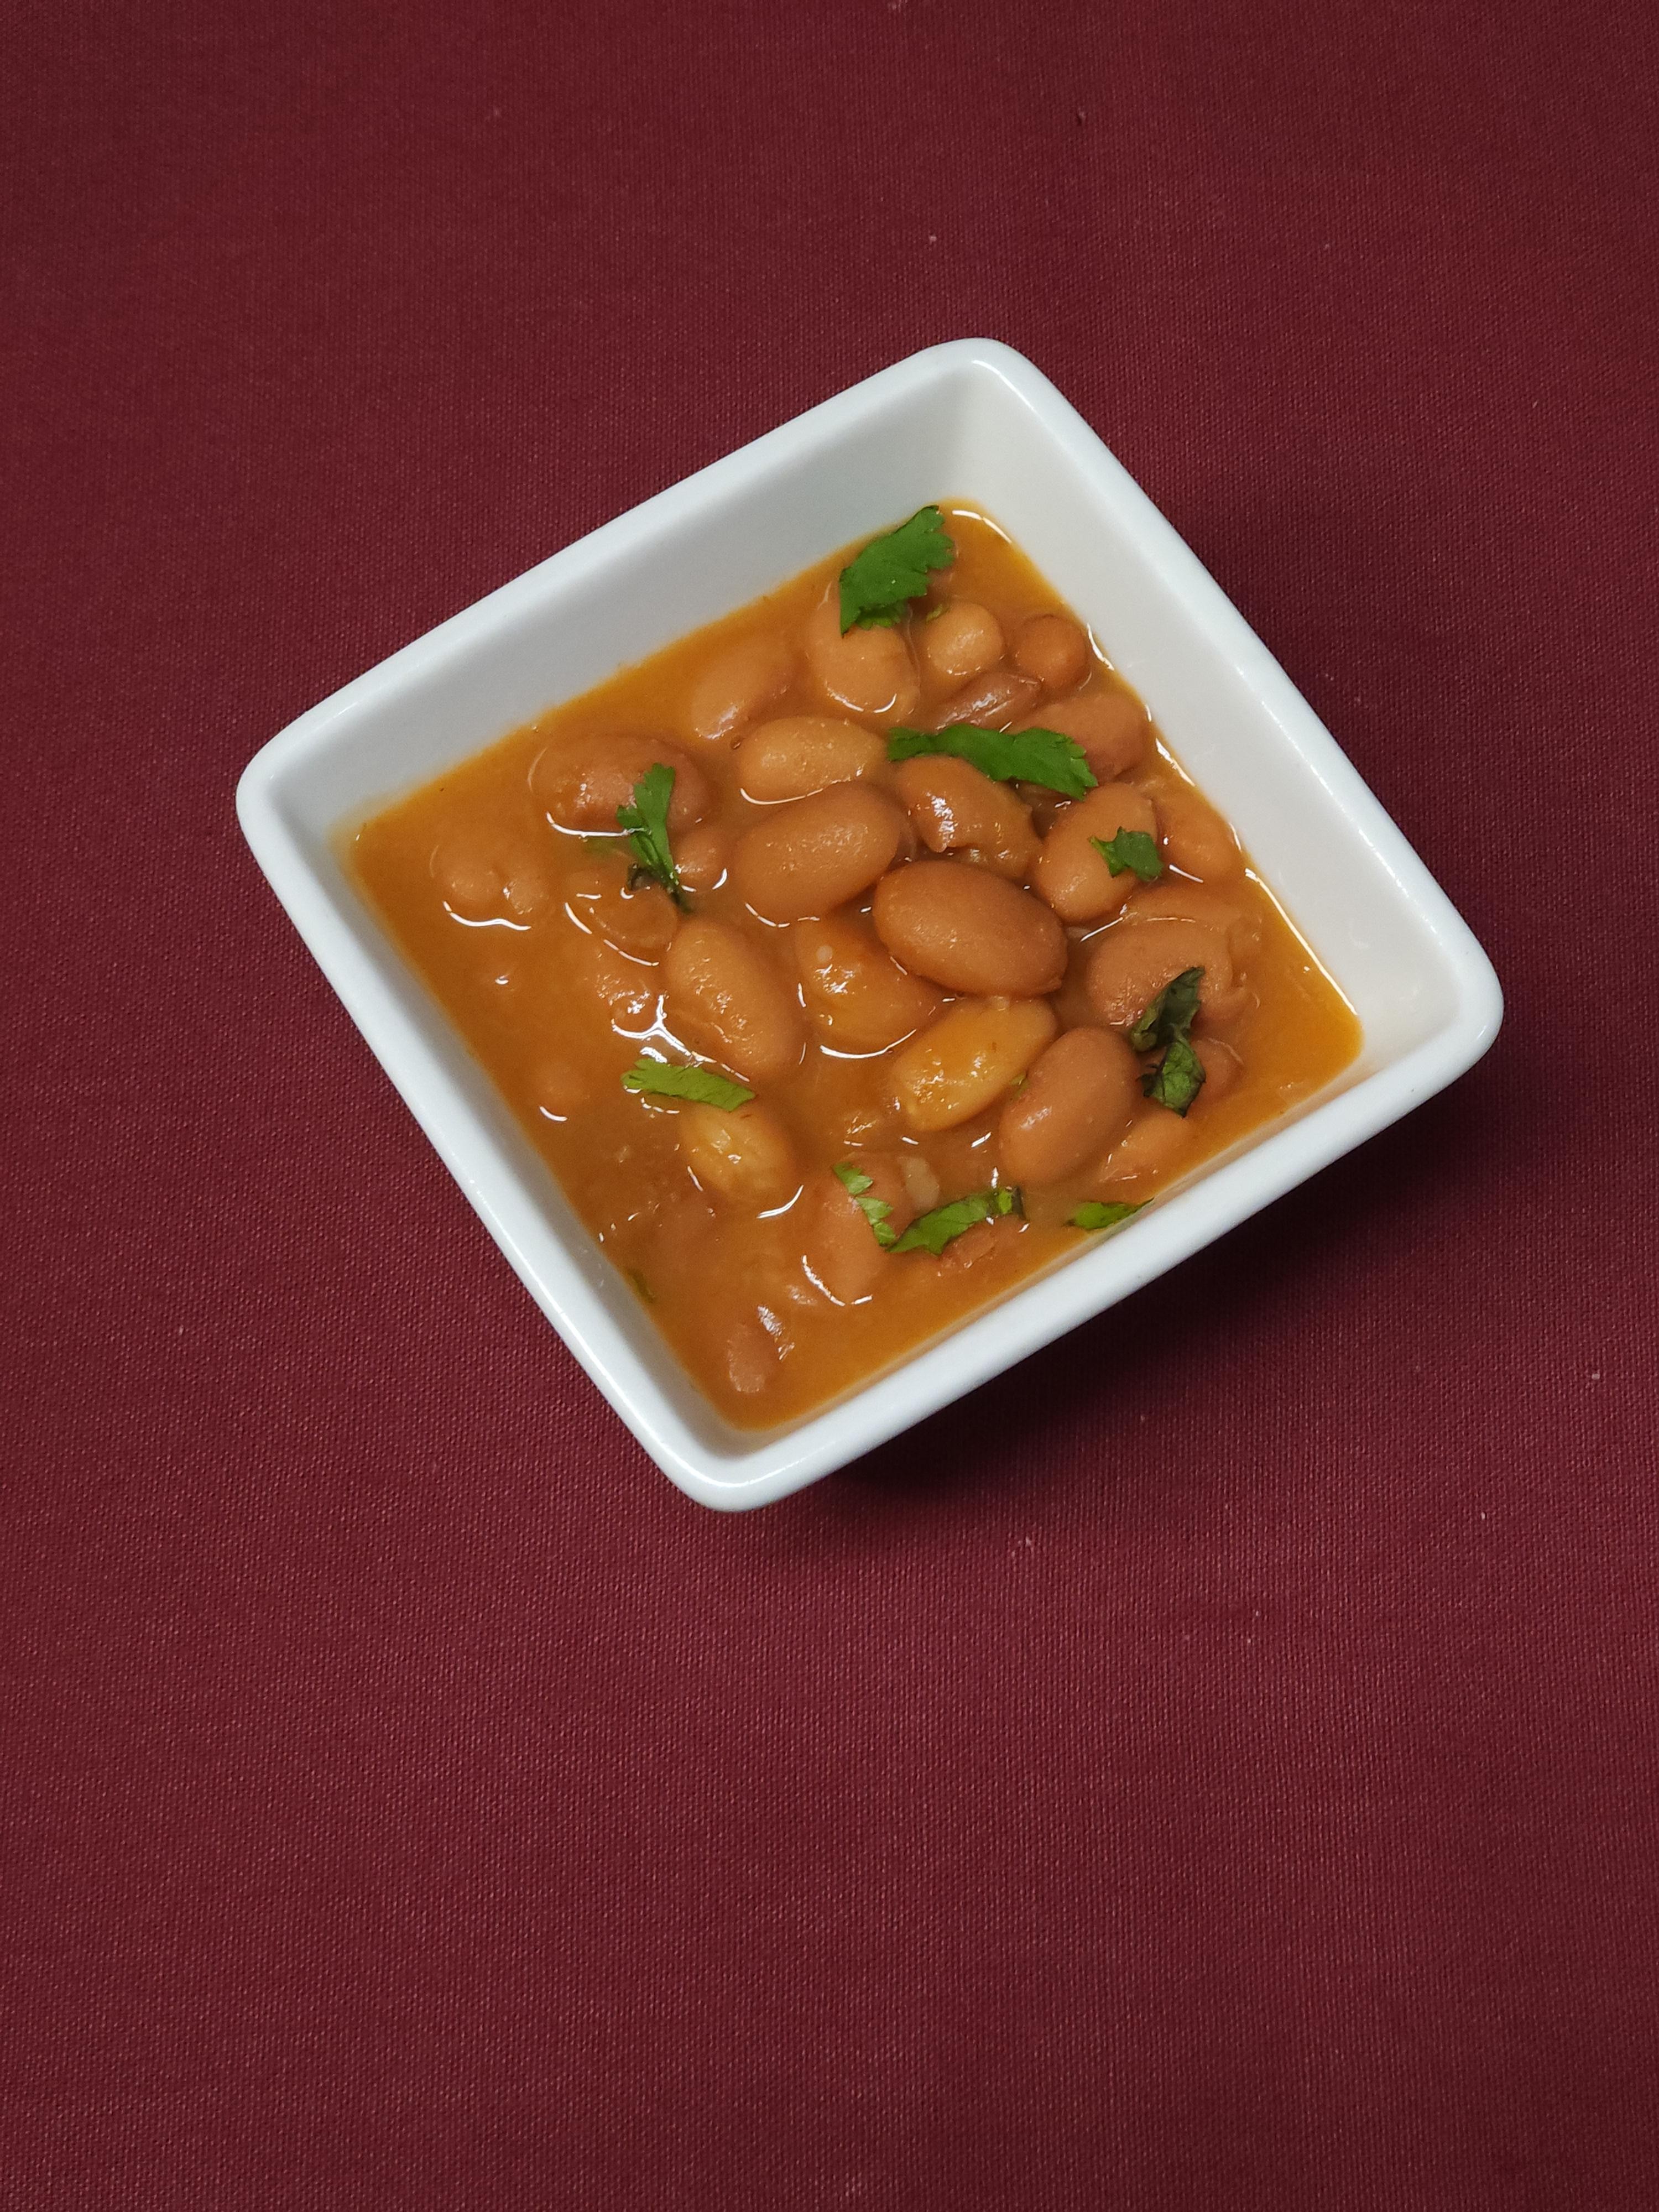 SIDE PINTO BEANS